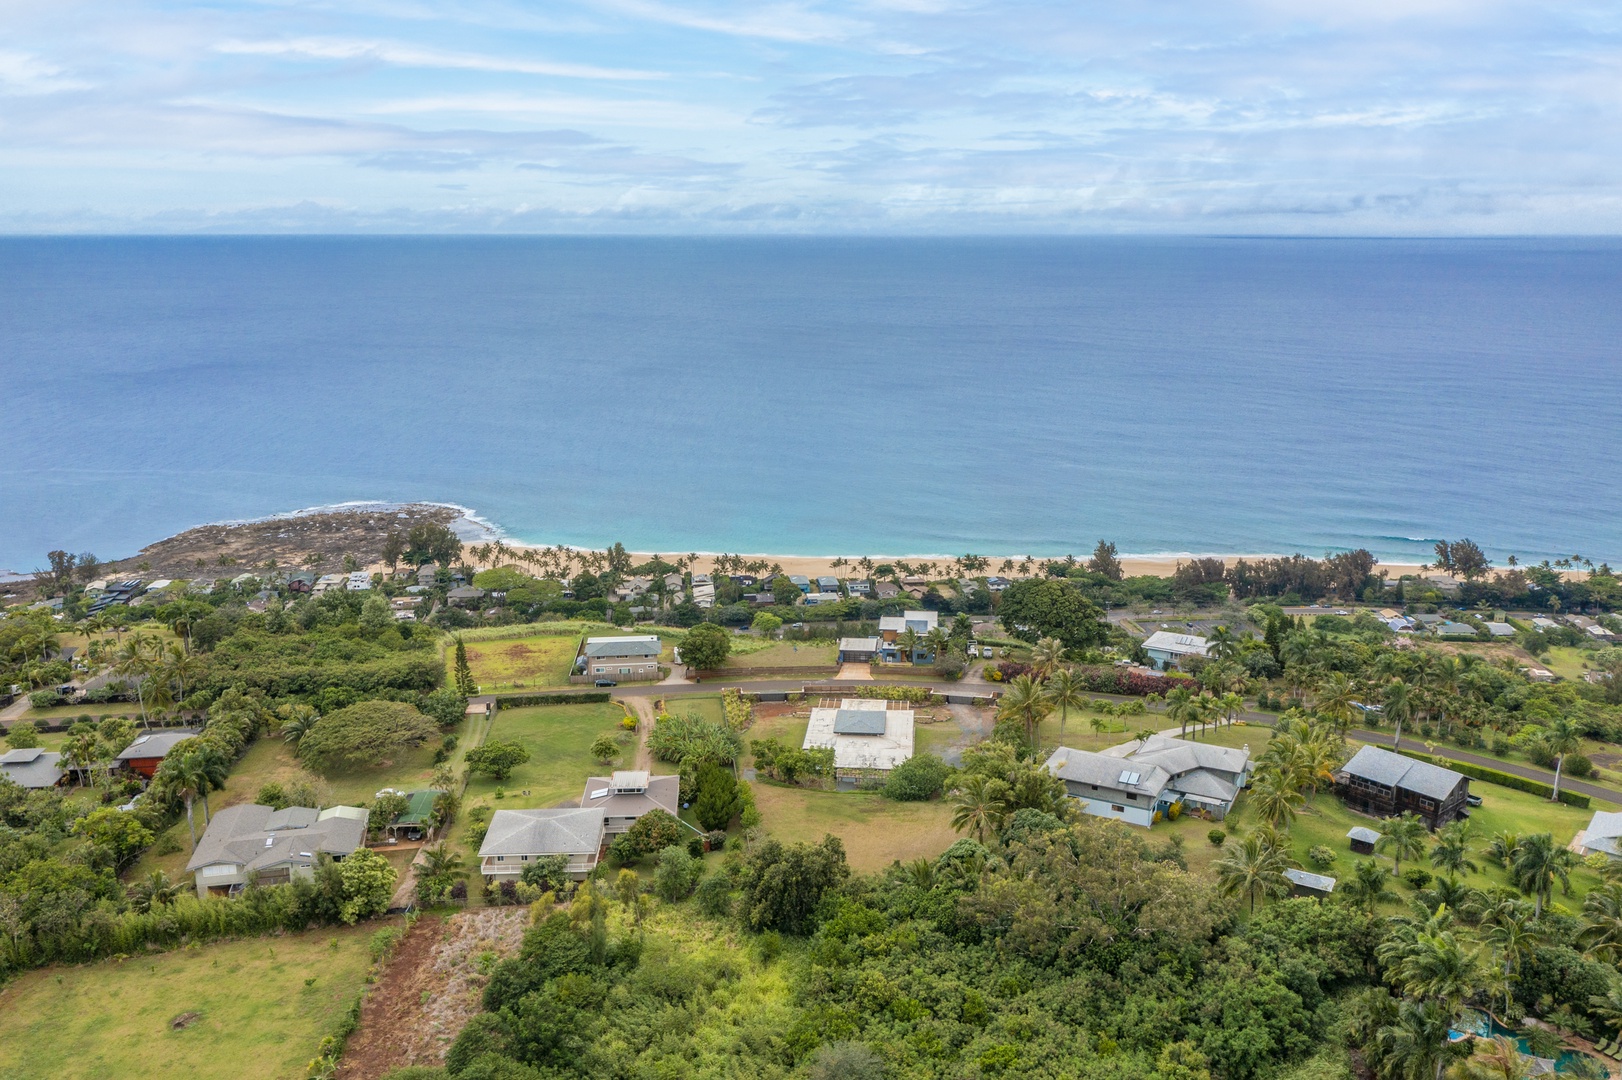 Haleiwa Vacation Rentals, Hale Mahina - Hale Mahina is located on a half acre of land, in a private neighborhood, about 5 minutes drive from the ocean.